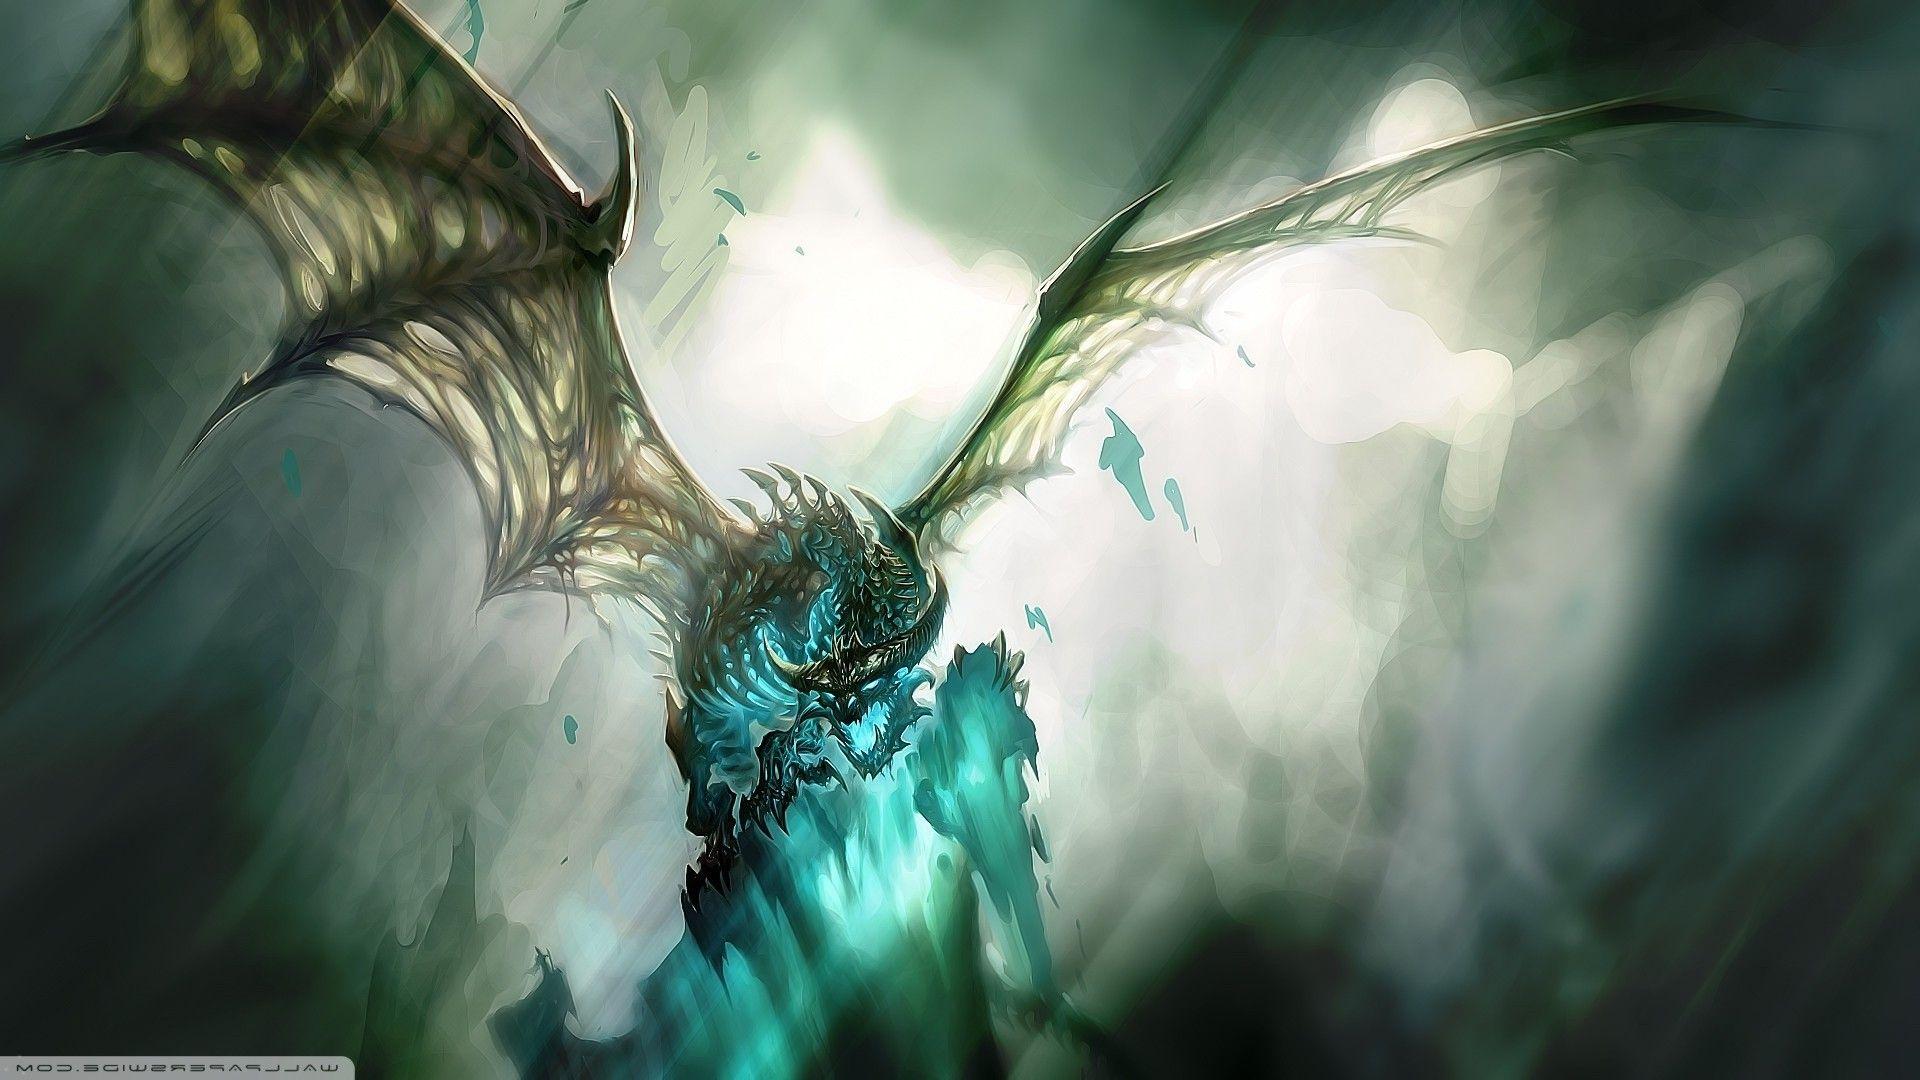 Lich King World of Warcraft Wrath of the Lich King wallpaper. HD